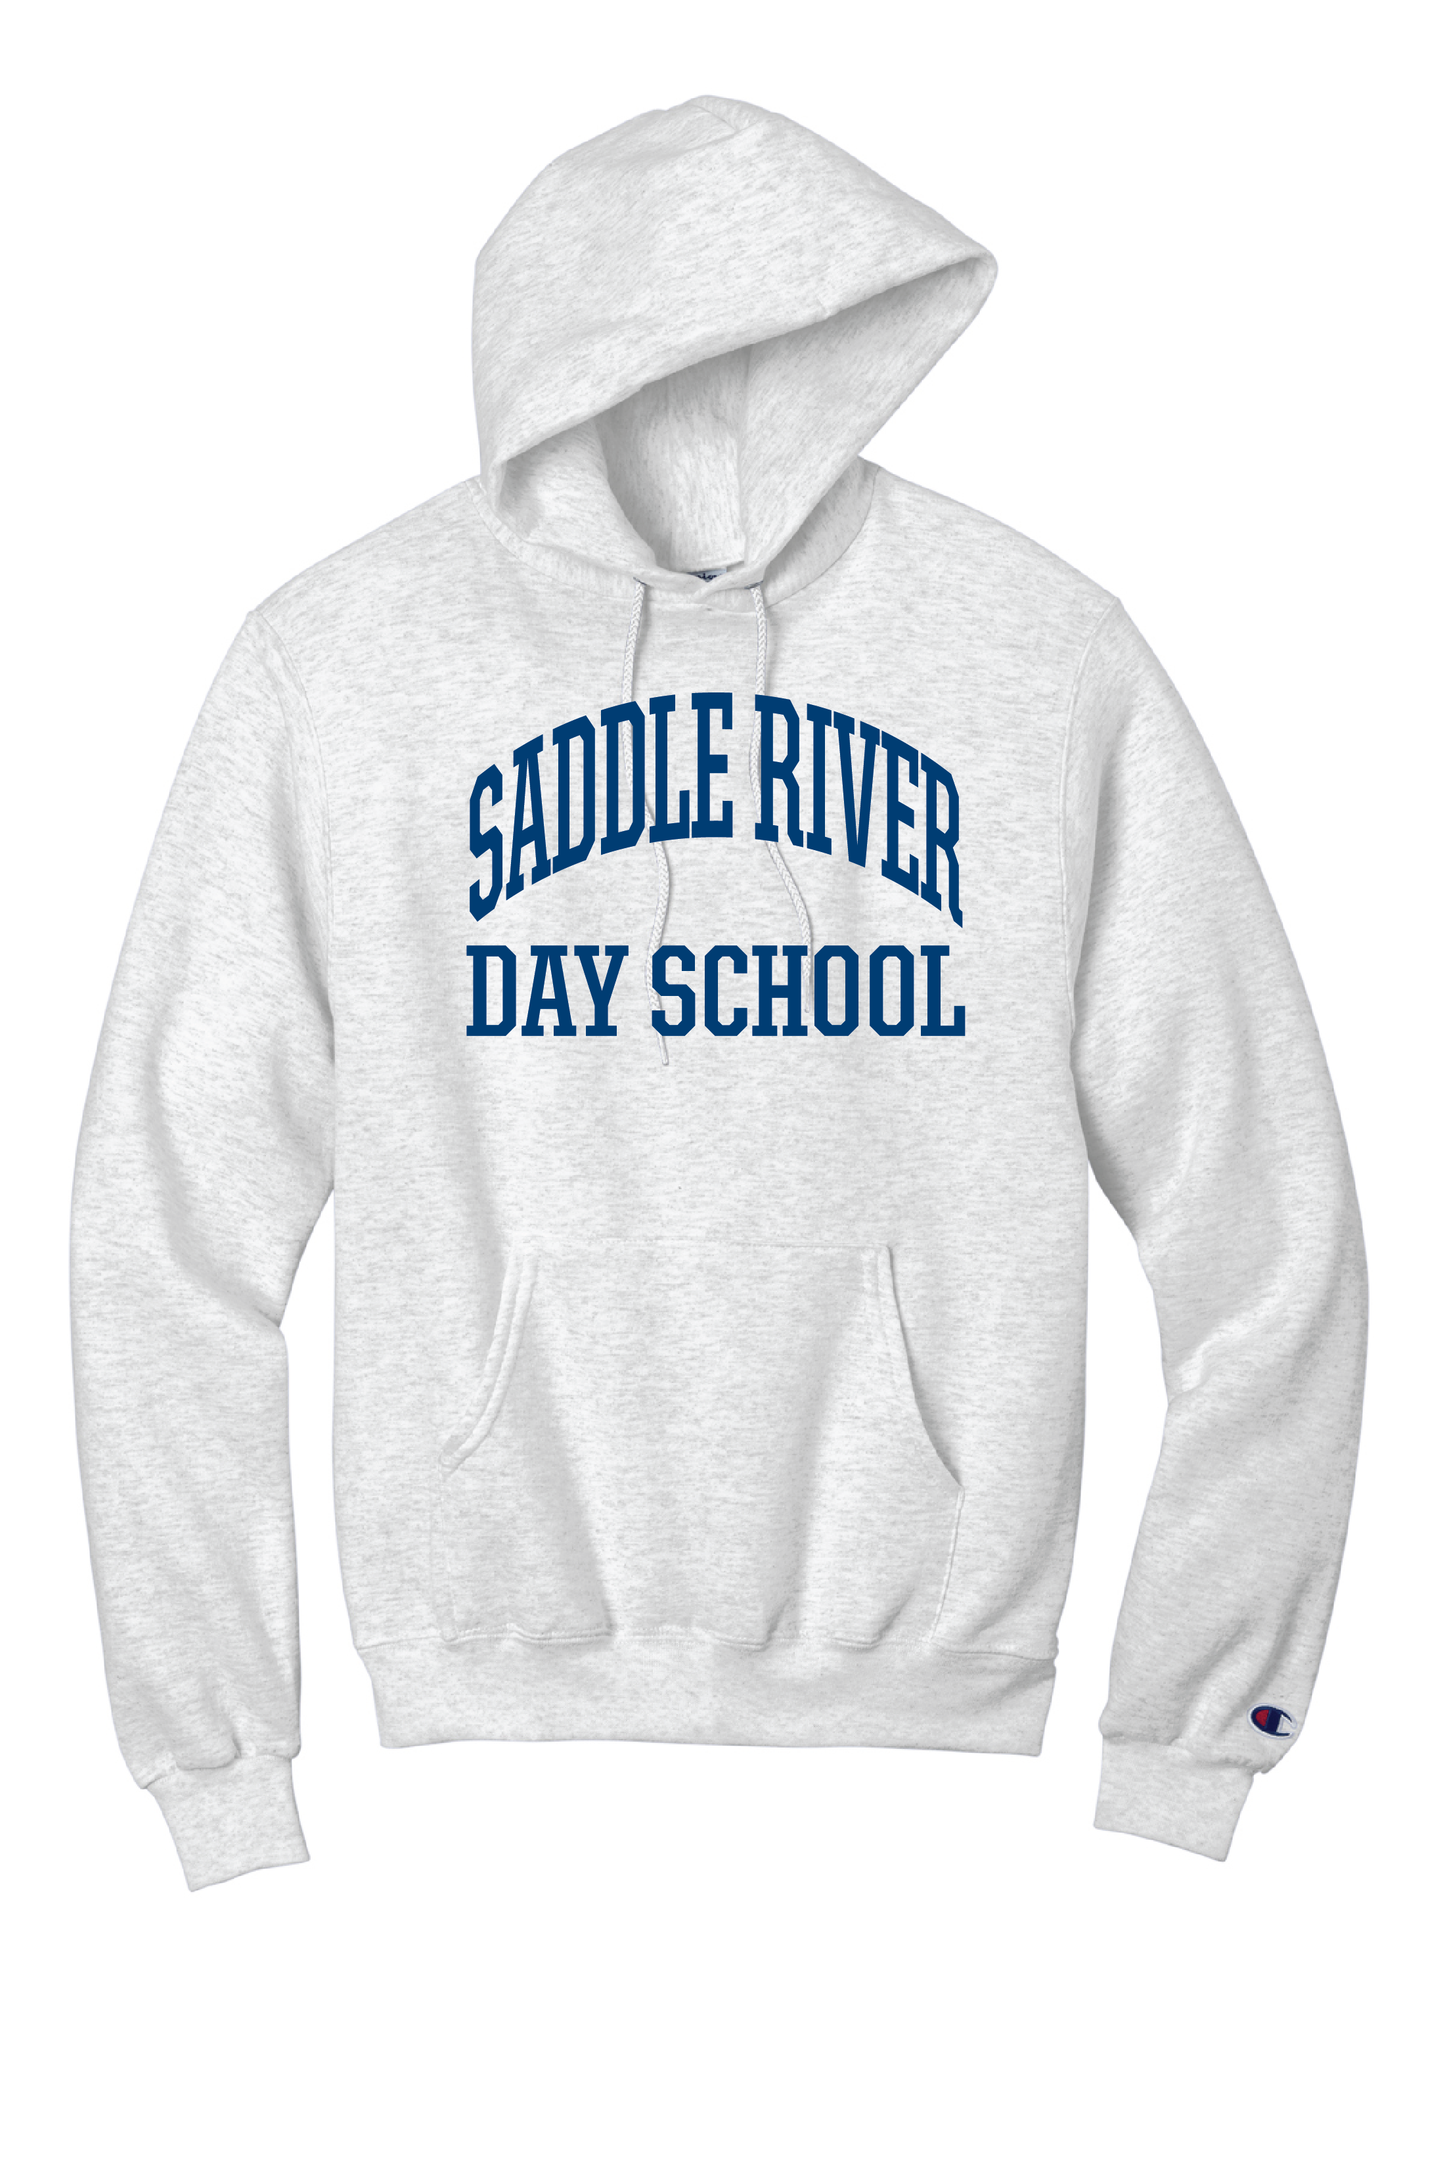 Saddle River Day School Classic Arched Champion Powerblend Hooded Sweatshirt